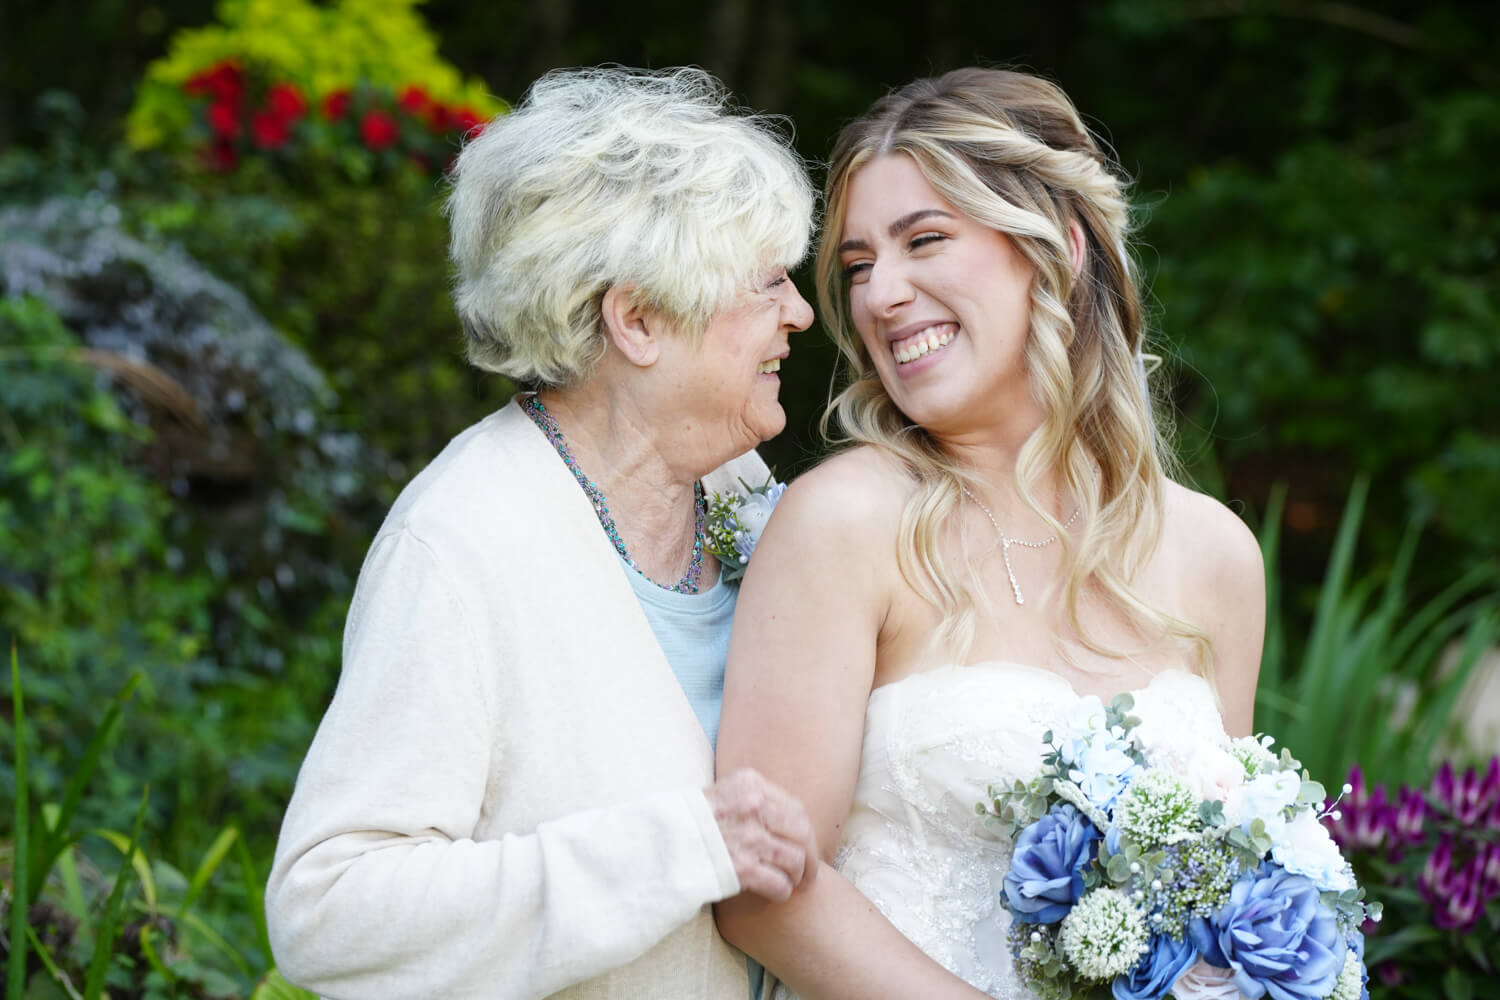 Bride and her grandmother smiling at each other while posing for family pictures at her wedding